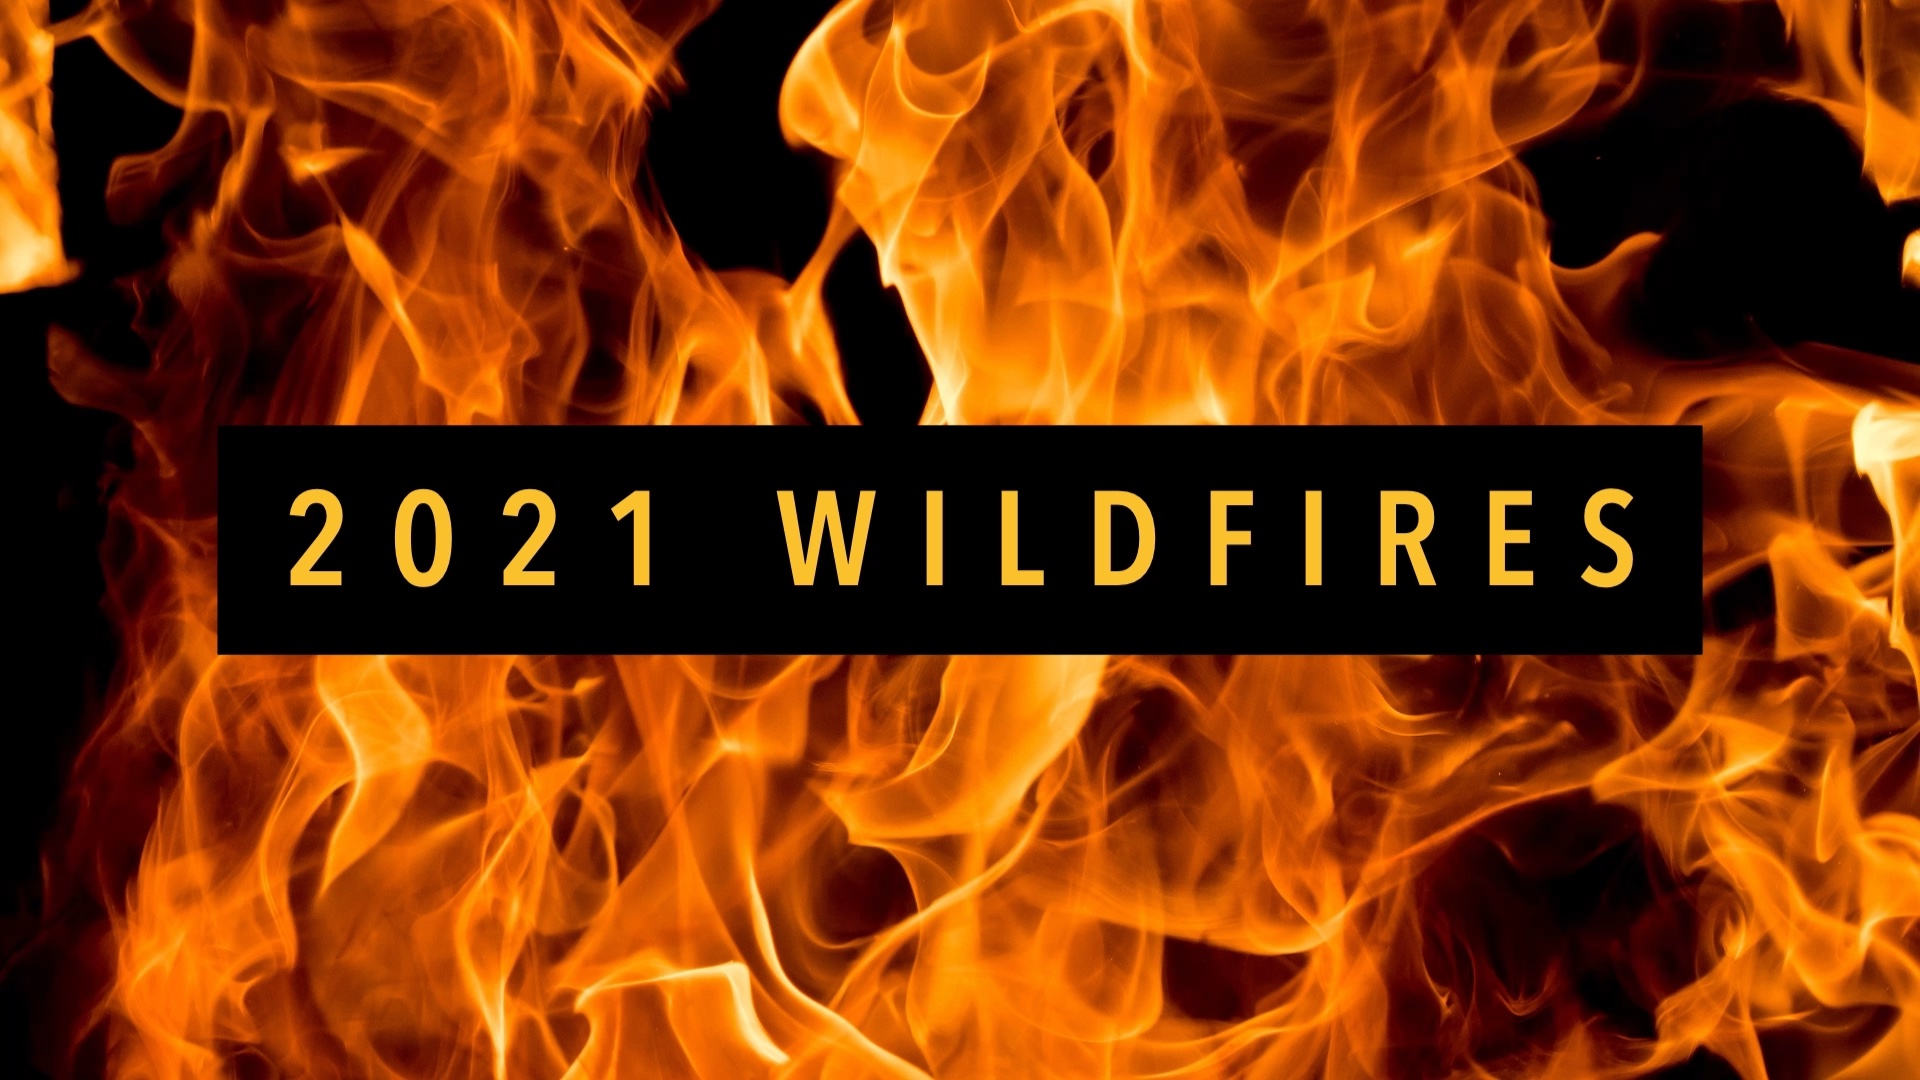 Close-up photo of flames with text stating "2021 Wildfires".